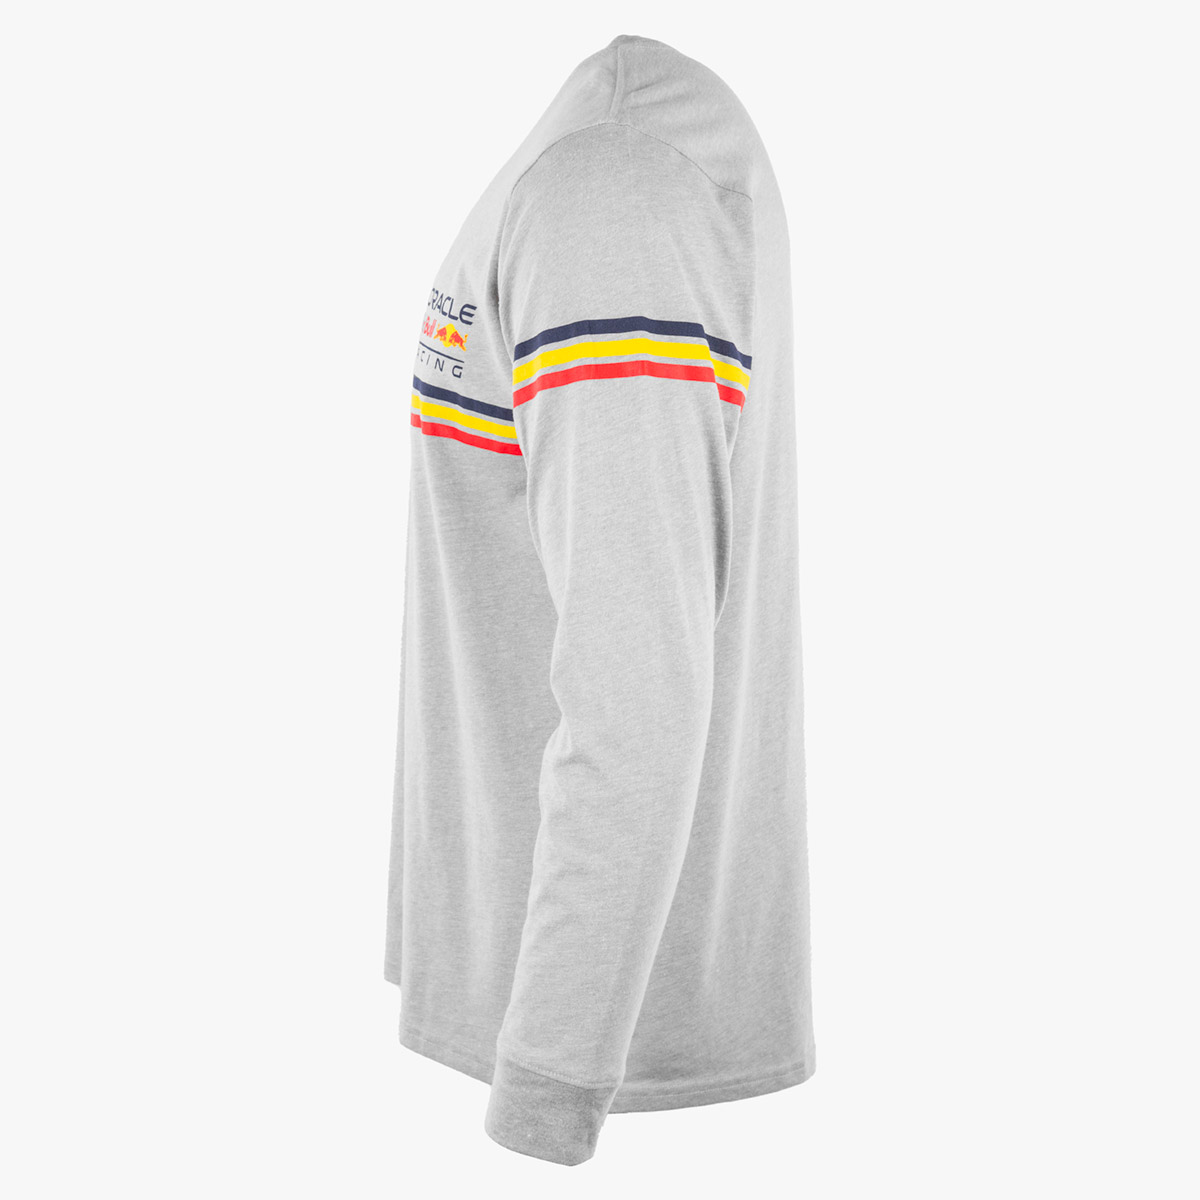 Oracle Red Bull Longsleeve Crewneck Tee with Racer Stripes image number 2